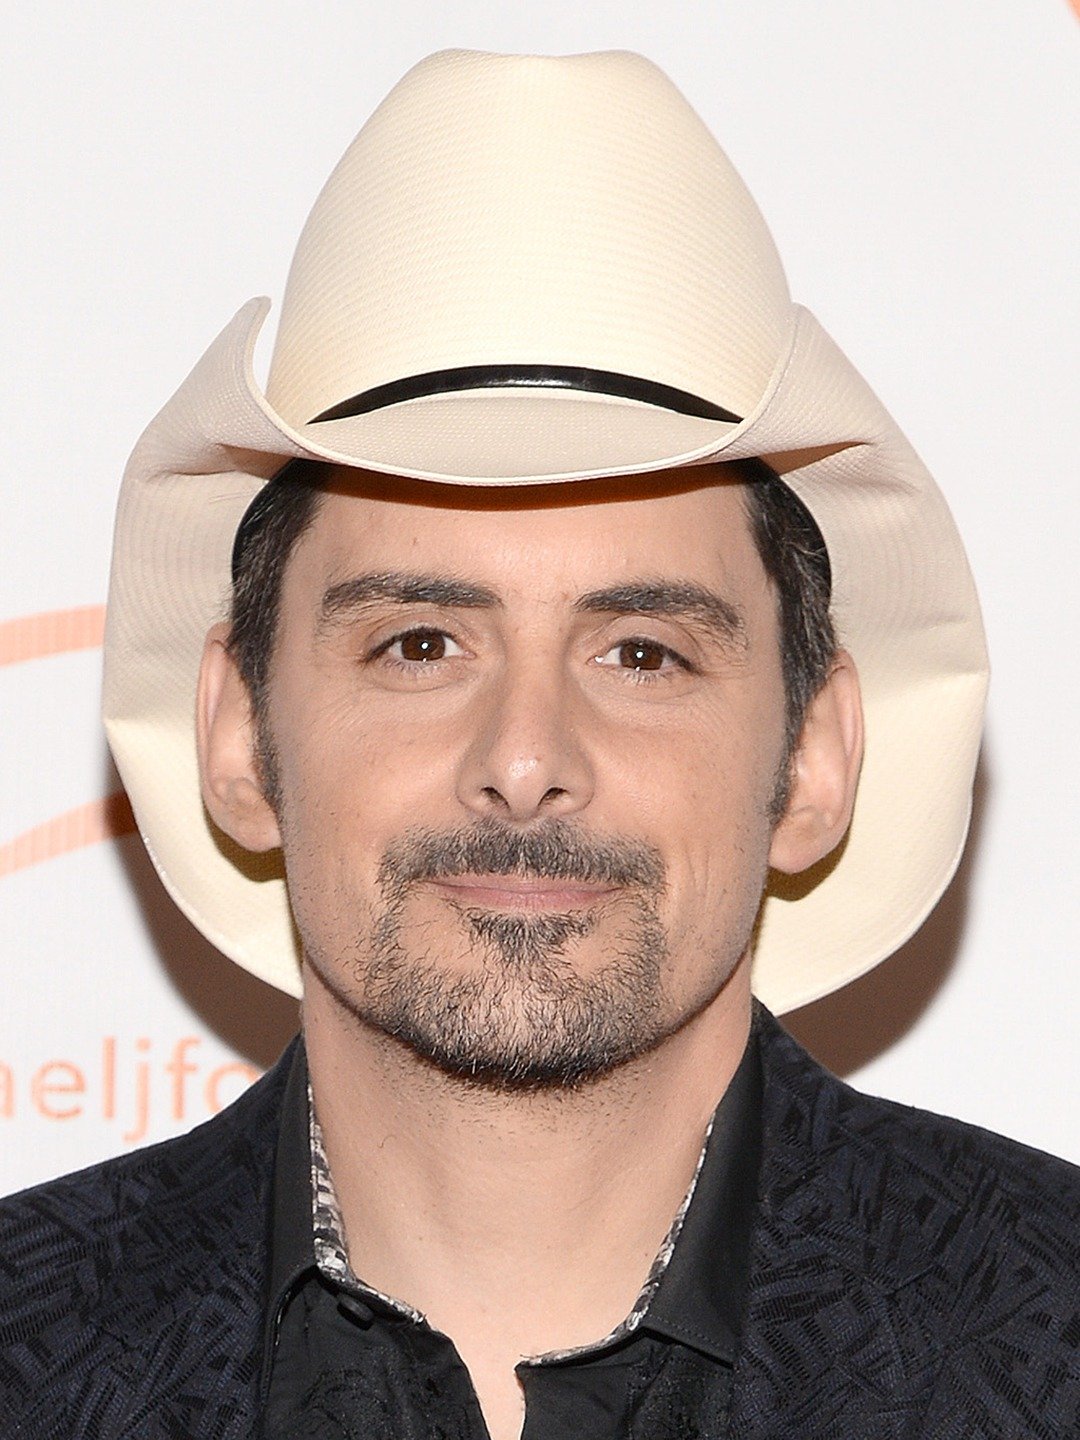 Brad Paisley, Biography, Songs, & Facts